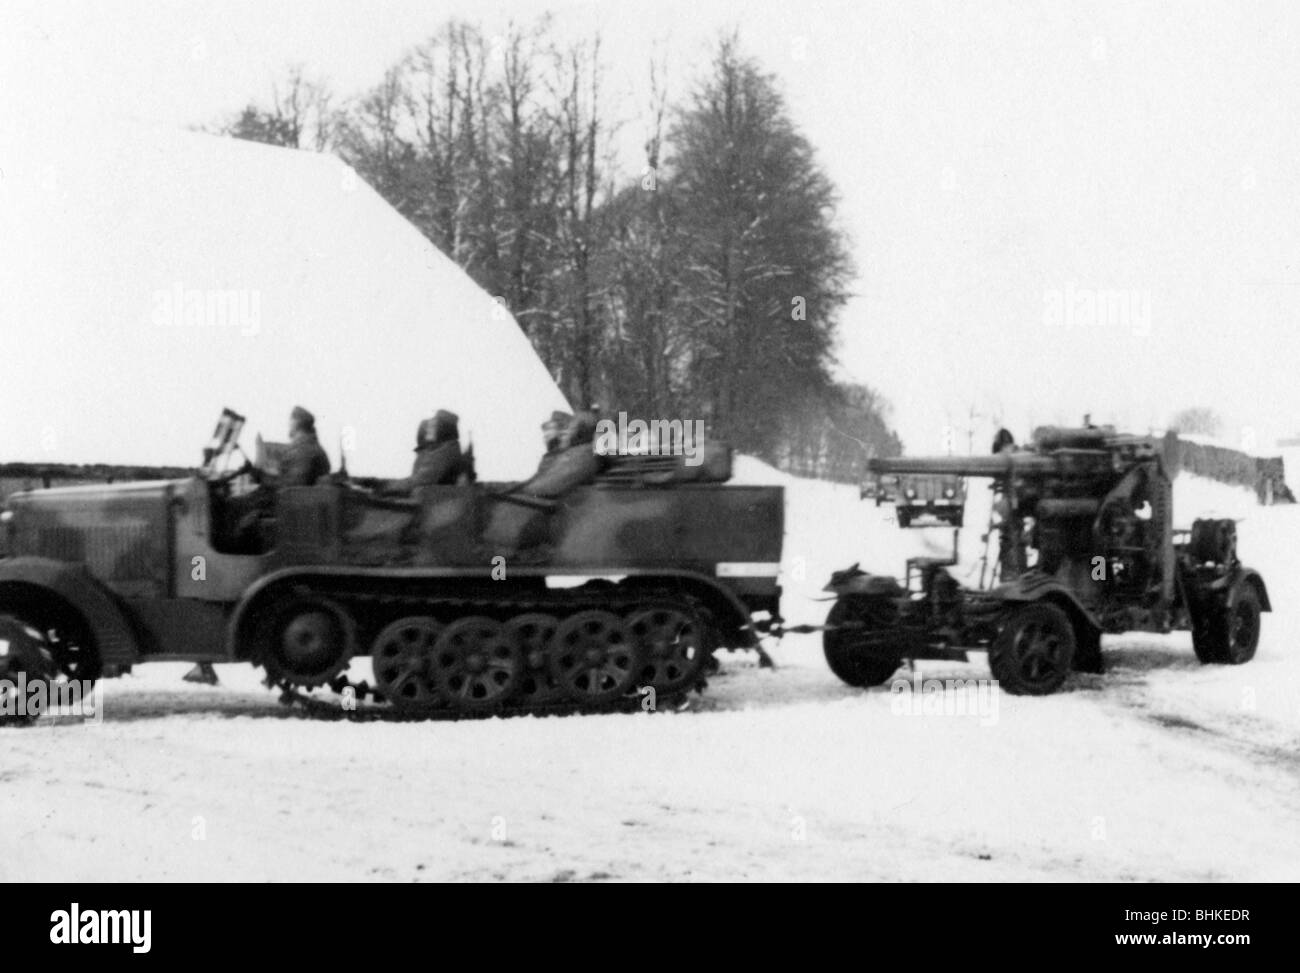 Nazism / National Socialism, military, Wehrmacht, Luftwaffe, anti-aircraft battery during training in the winter, half-track tractor with 88 mm AA gun Flak 18, 1930s, Stock Photo